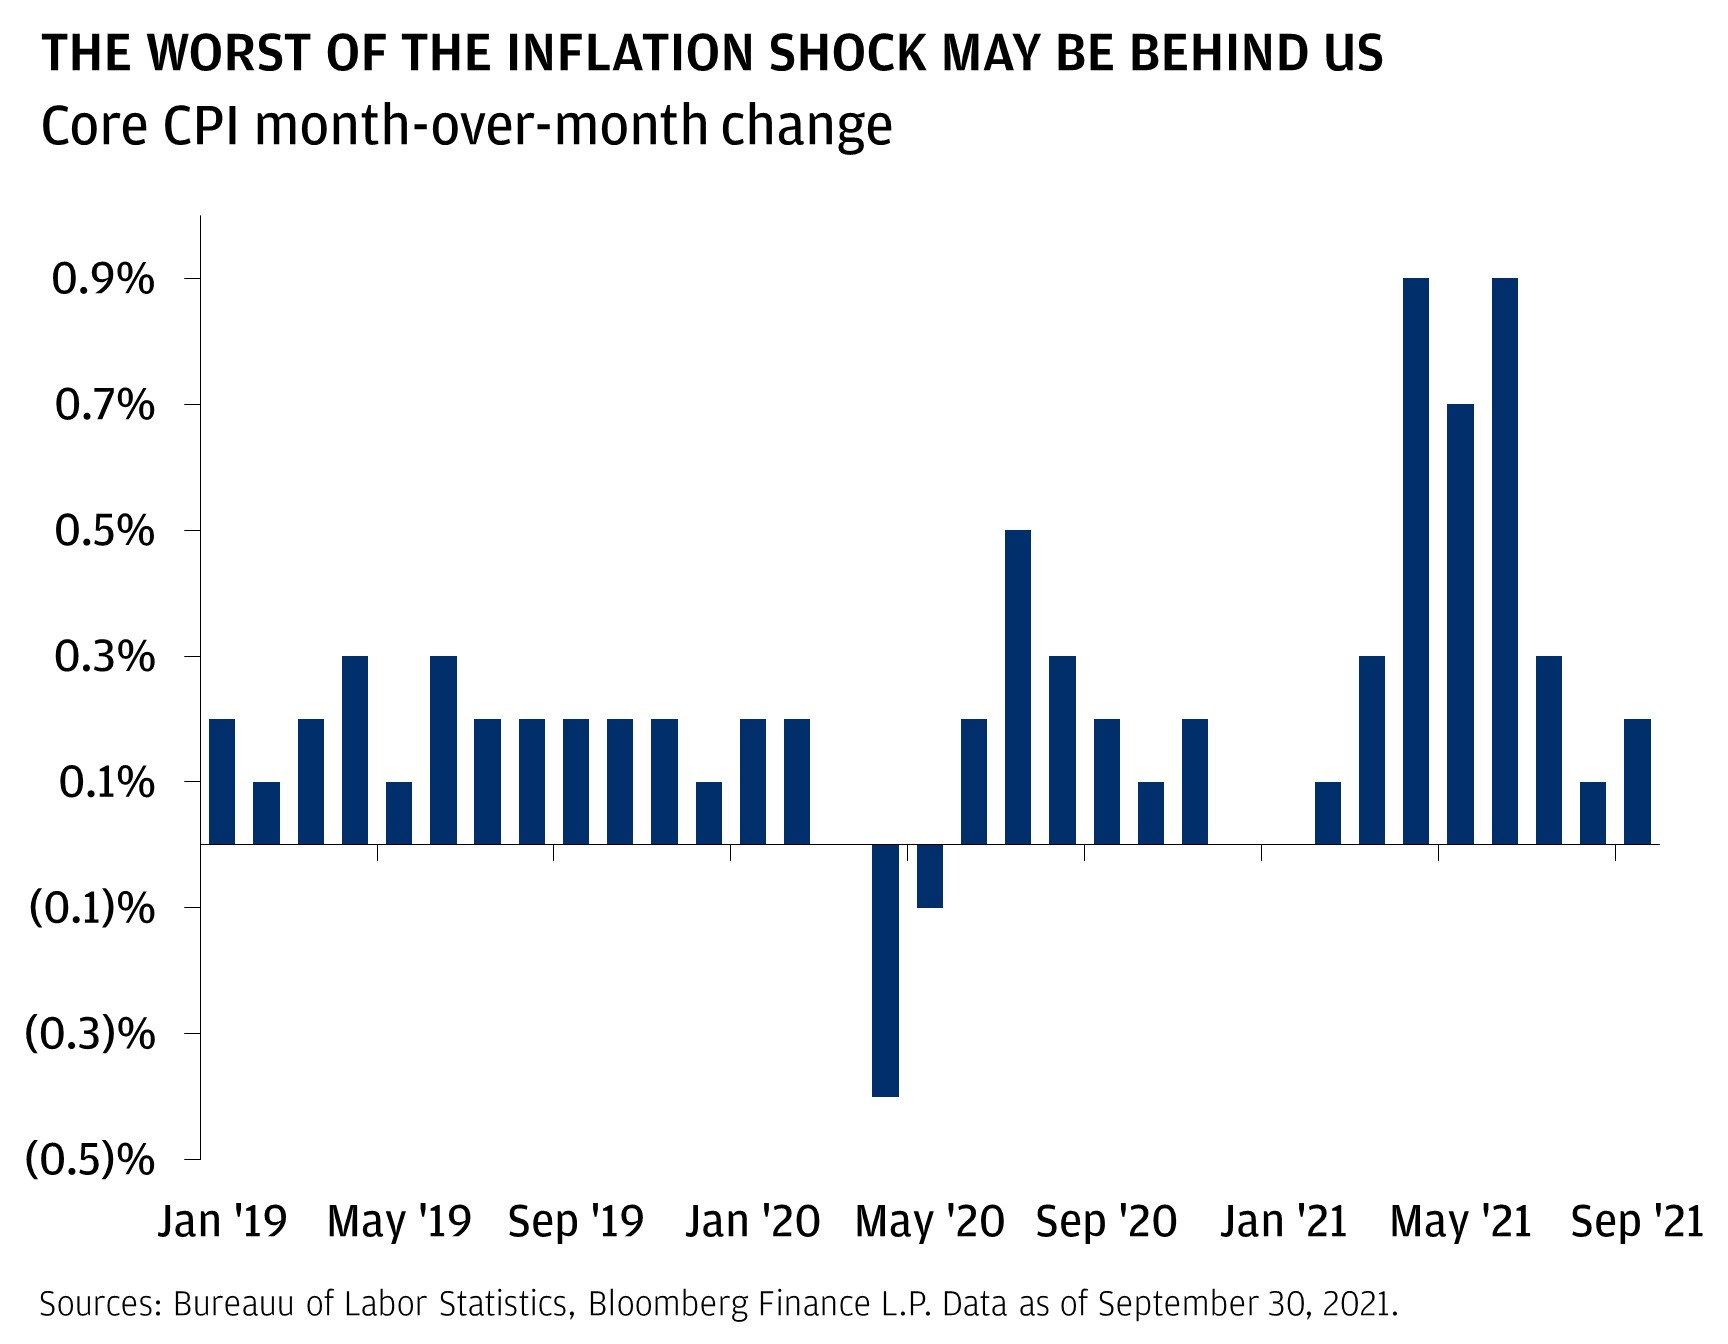 This chart shows the Core CPI month-over-month change, from January 31, 2019, to September 30, 2021. The Core CPI came at 0.2% in January 2019, 0.1% in February 2019, 0.2% in March 2019, 0.3% in April 2019, 0.1% in May 2019, 0.3% in June 2019, 0.2% in July 2019, 0.2% in August 2019, 0.2% in September 2019, 0.2% in October 2019, 0.2% in November 2019, 0.1% in December 2019, 0.2% in January 2020, 0.2% in February 2020, -0.4% in April 2020, -0.1% in May 2020, 0.2% in June 2020, 0.5% in July 2020, 0.3% in August 2020, 0.2% in September 2020, 0.1% in October 2020, 0.2% in November 2020, 0.1% in February 2021, and 0.3% in March 2021. It picked up to 0.9% in April 2020, 0.7% in May 2021, and 0.9% in June 2021. Since then, it has fallen back down to 0.3% in July 2021, 0.1% in August 2021, and 0.2% in September 2021.